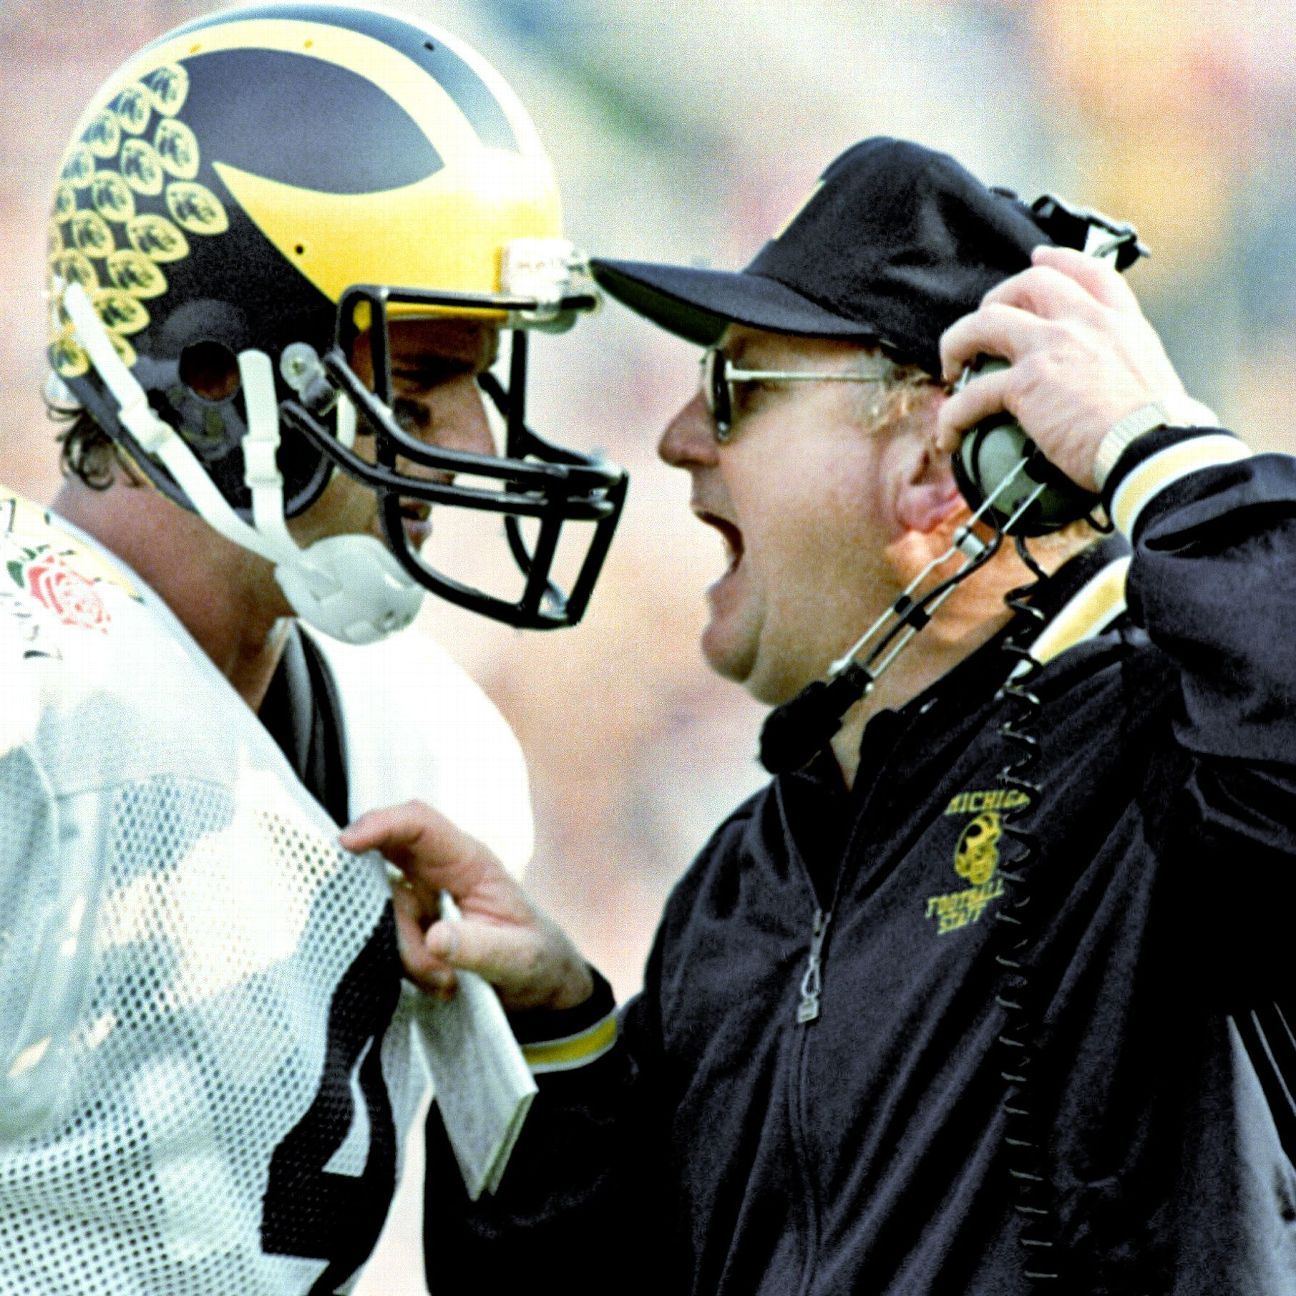 Former Michigan football players say coach Bo Schembechler ignored warnings, son's complaint about doctor's abuse